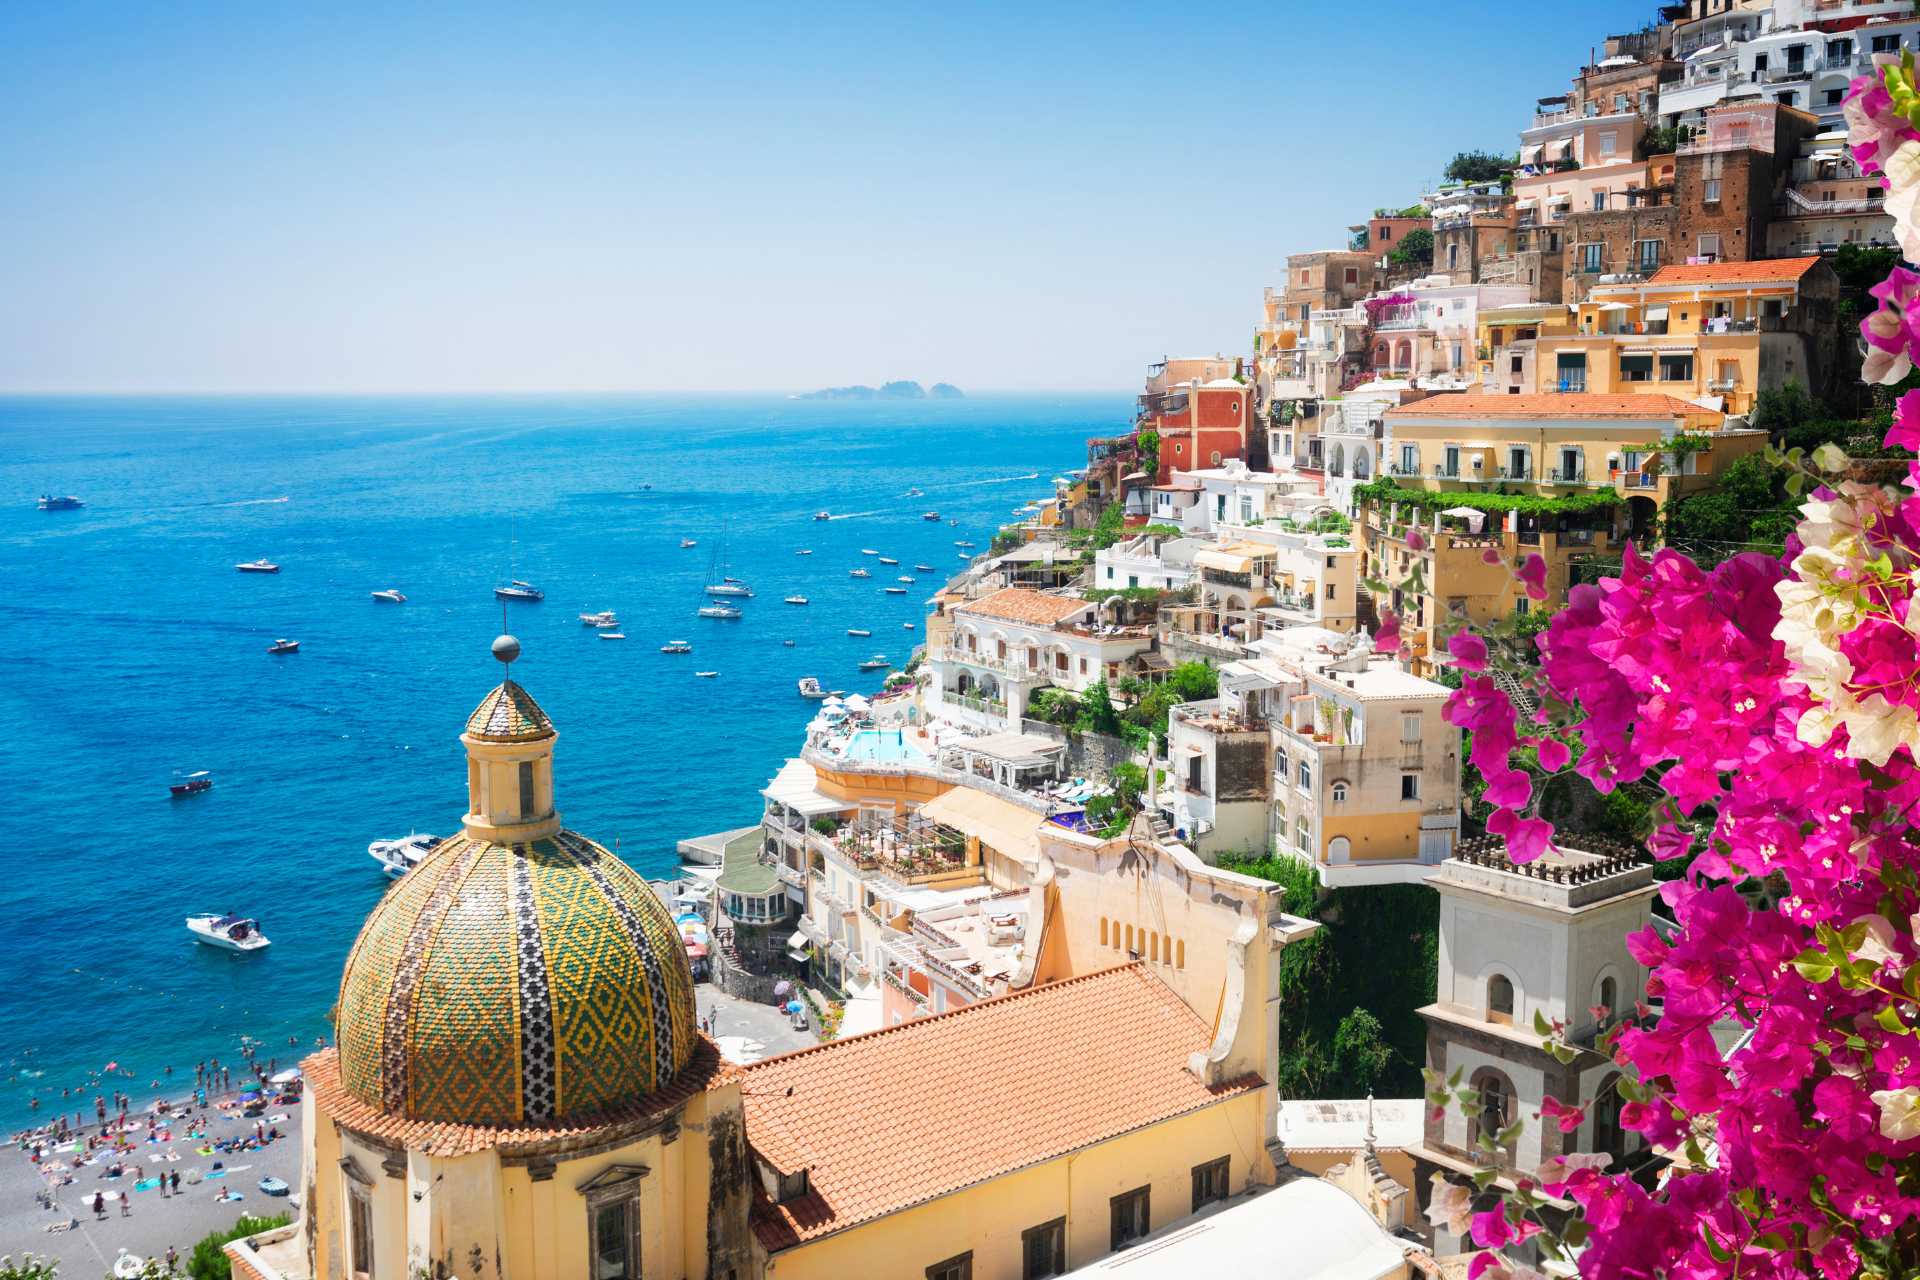 View of the water in Positano with flowers, Italy.